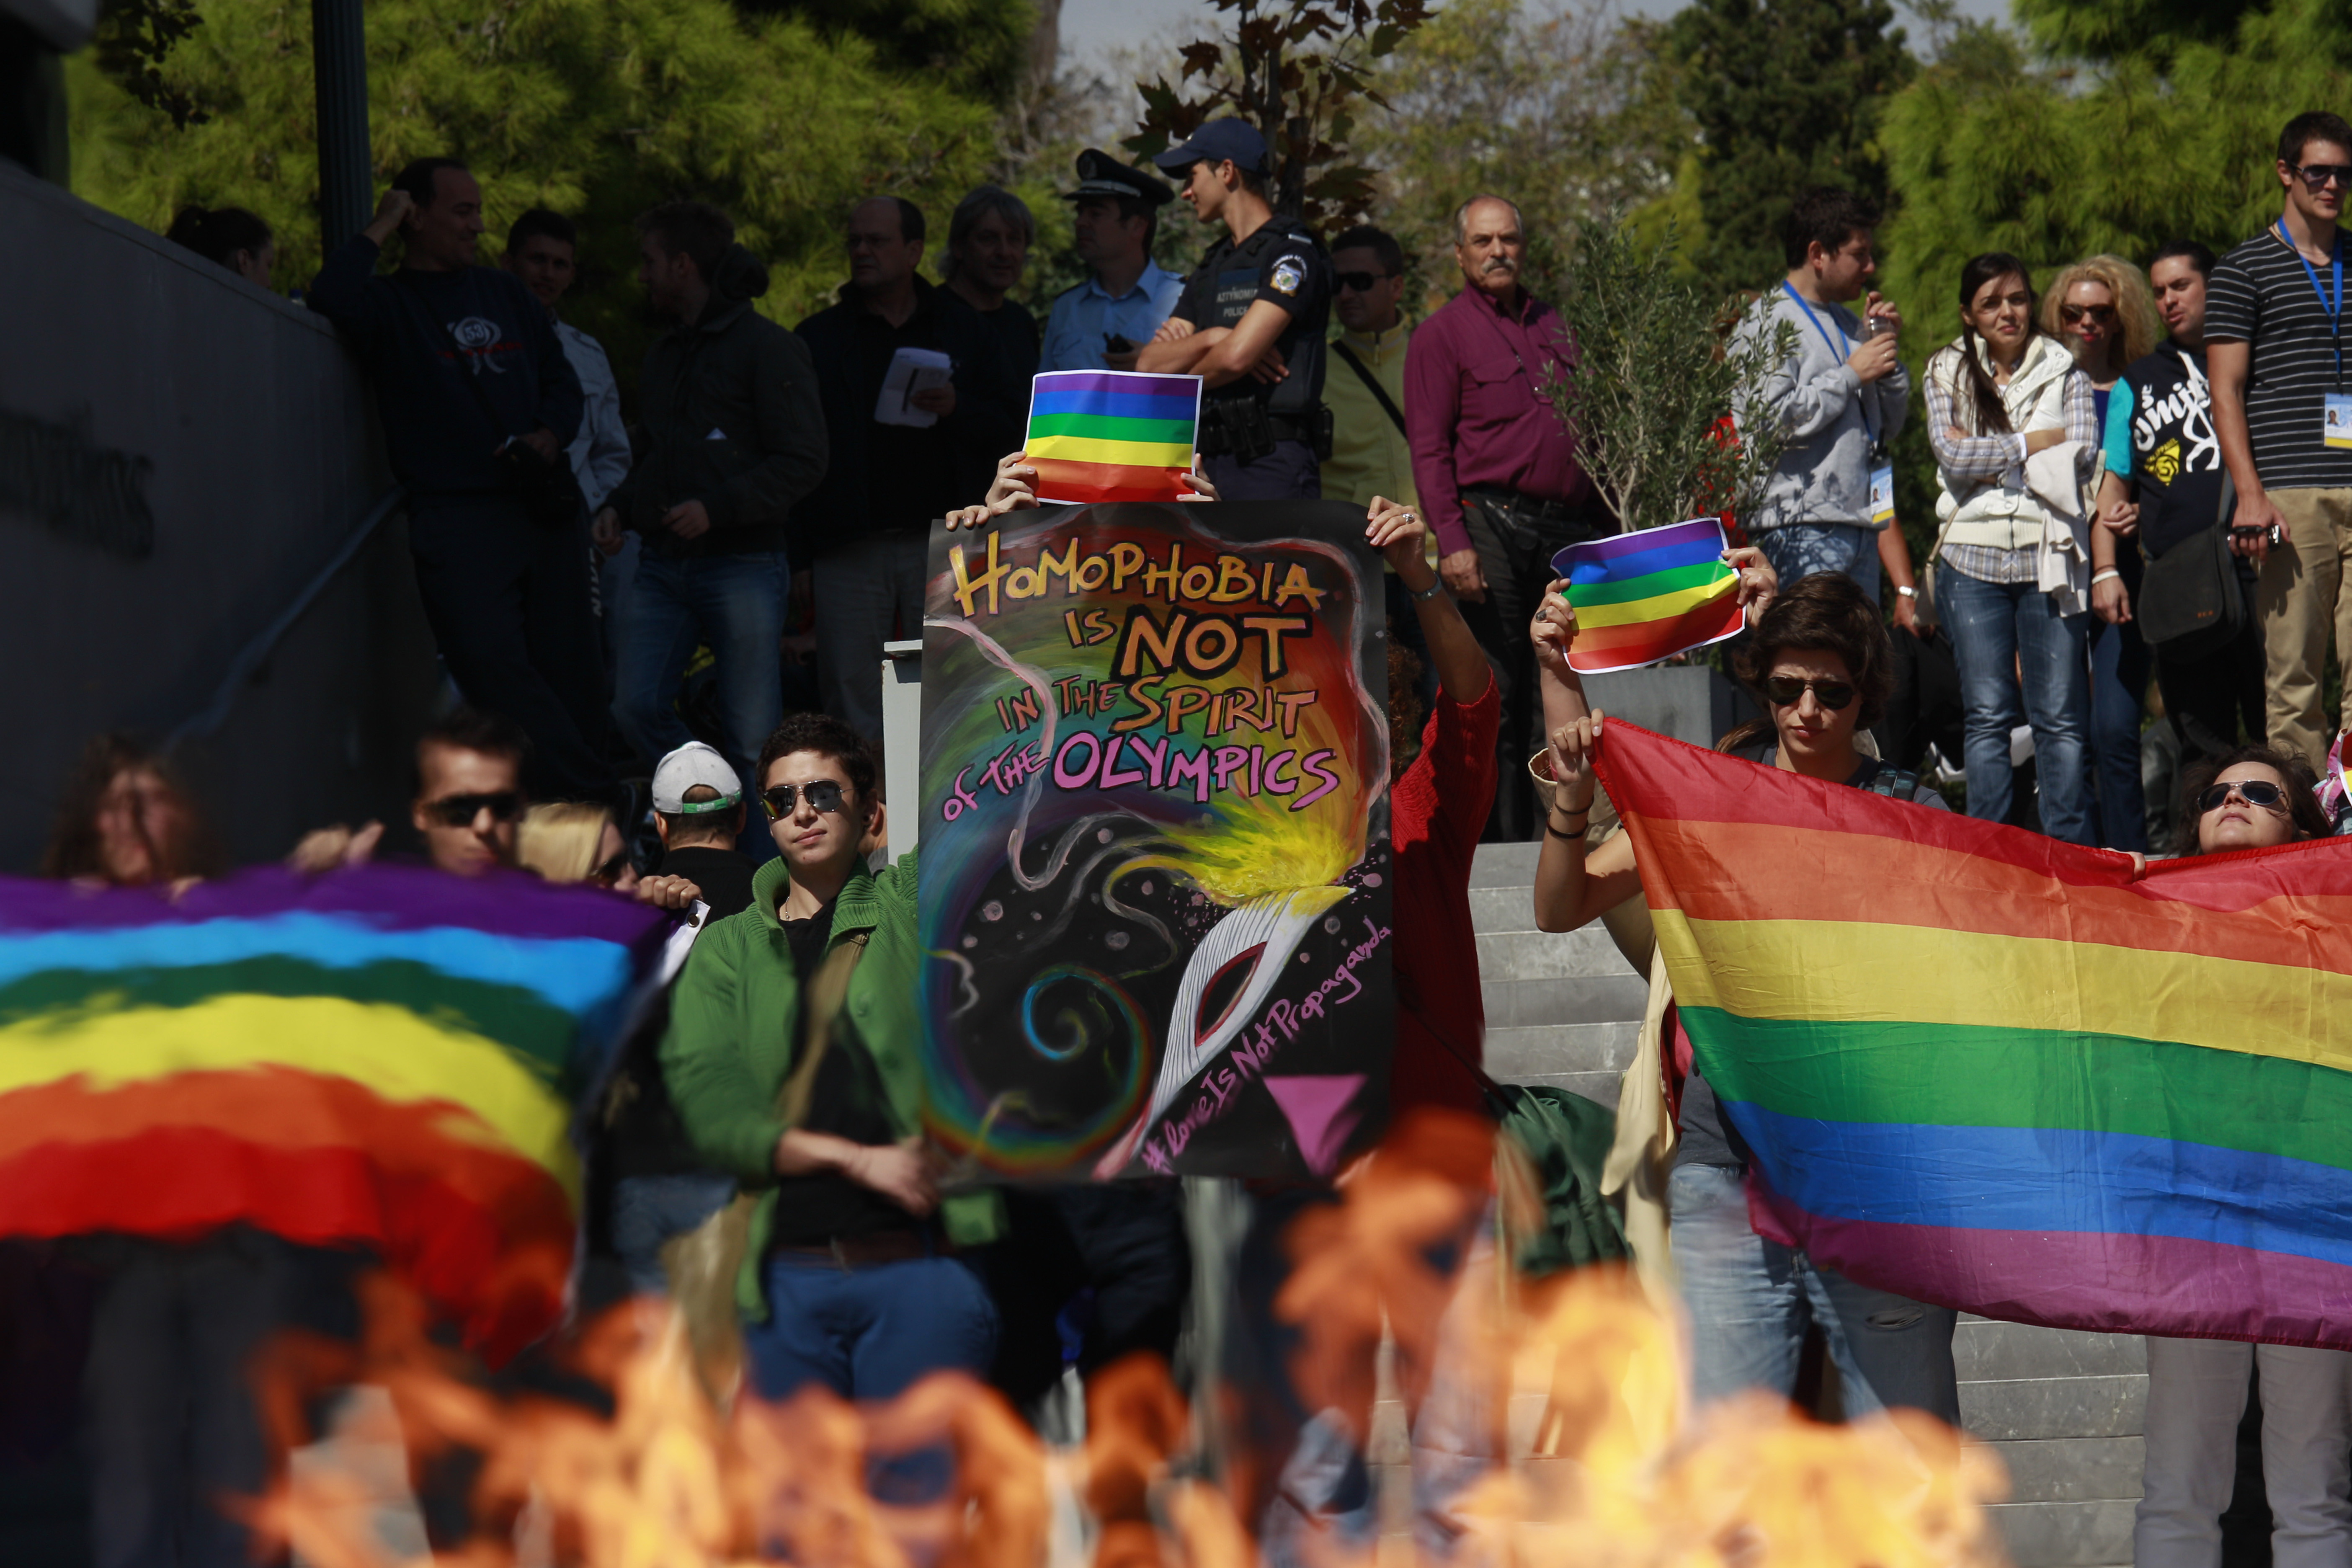 5 October 2013, Greece. LGBT rights activists protest on the steps of the Acropolis museum in Athens while the Olympic flame makes its way through the city.